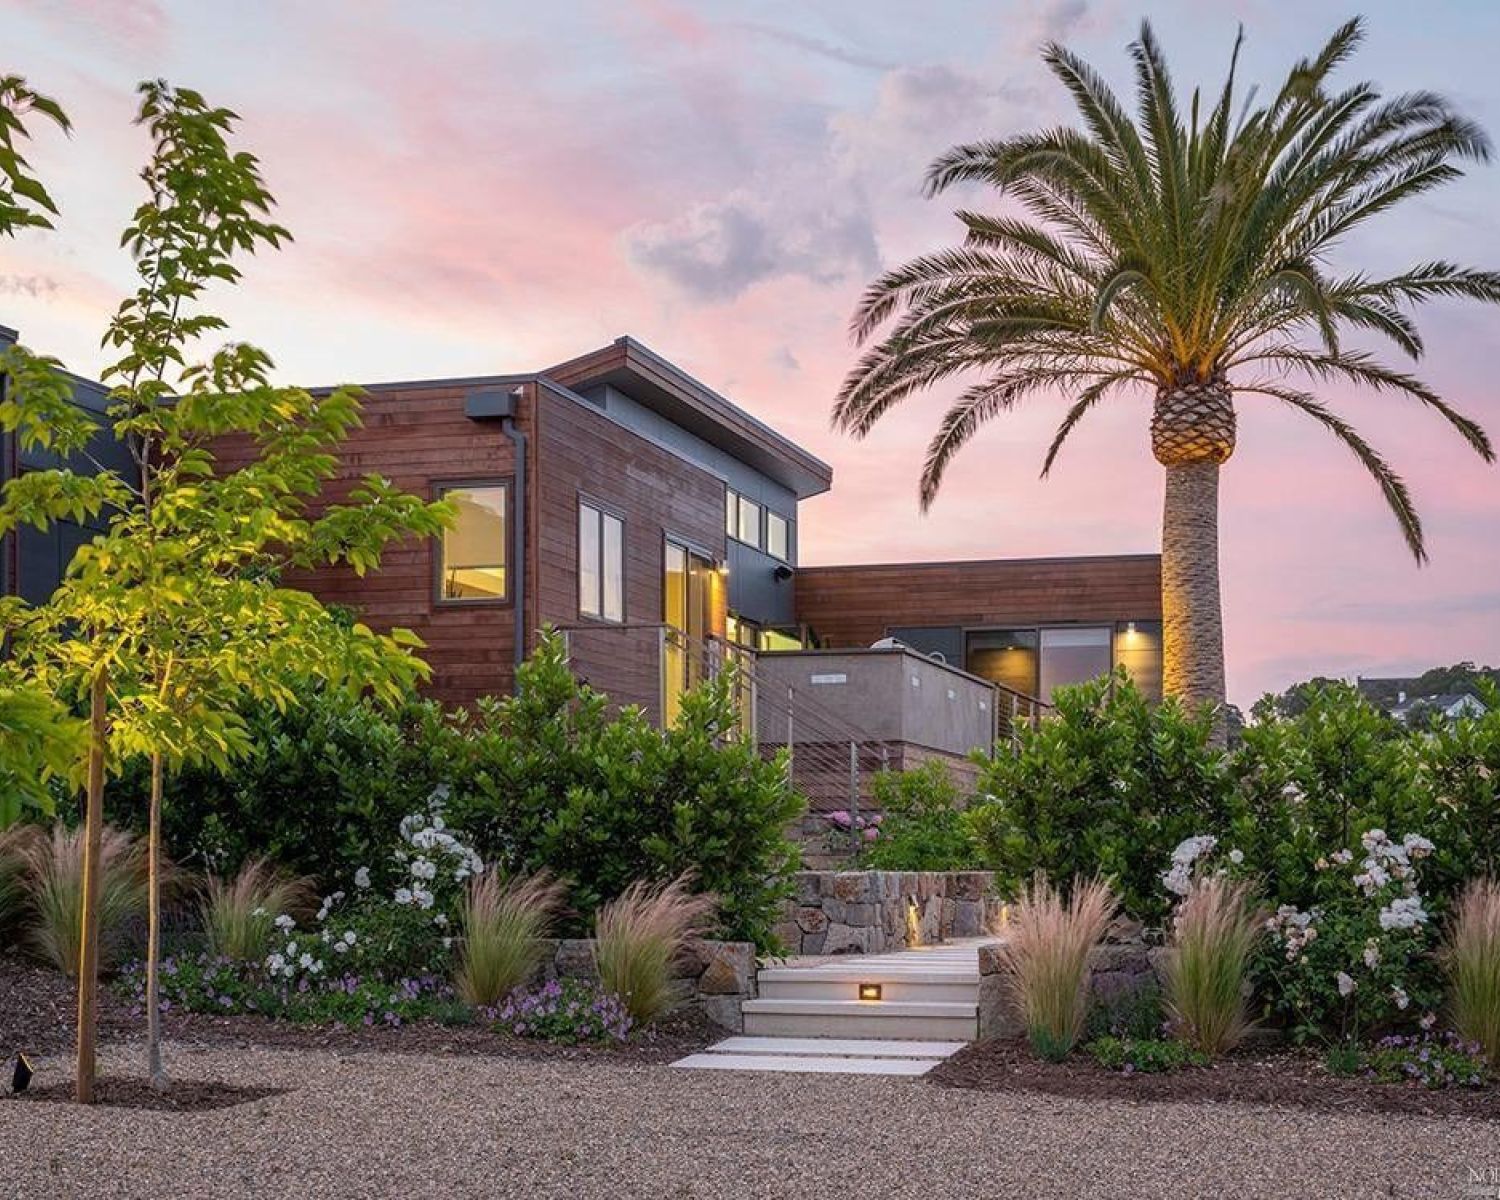 image of modern home at dusk with palm trees and sunset